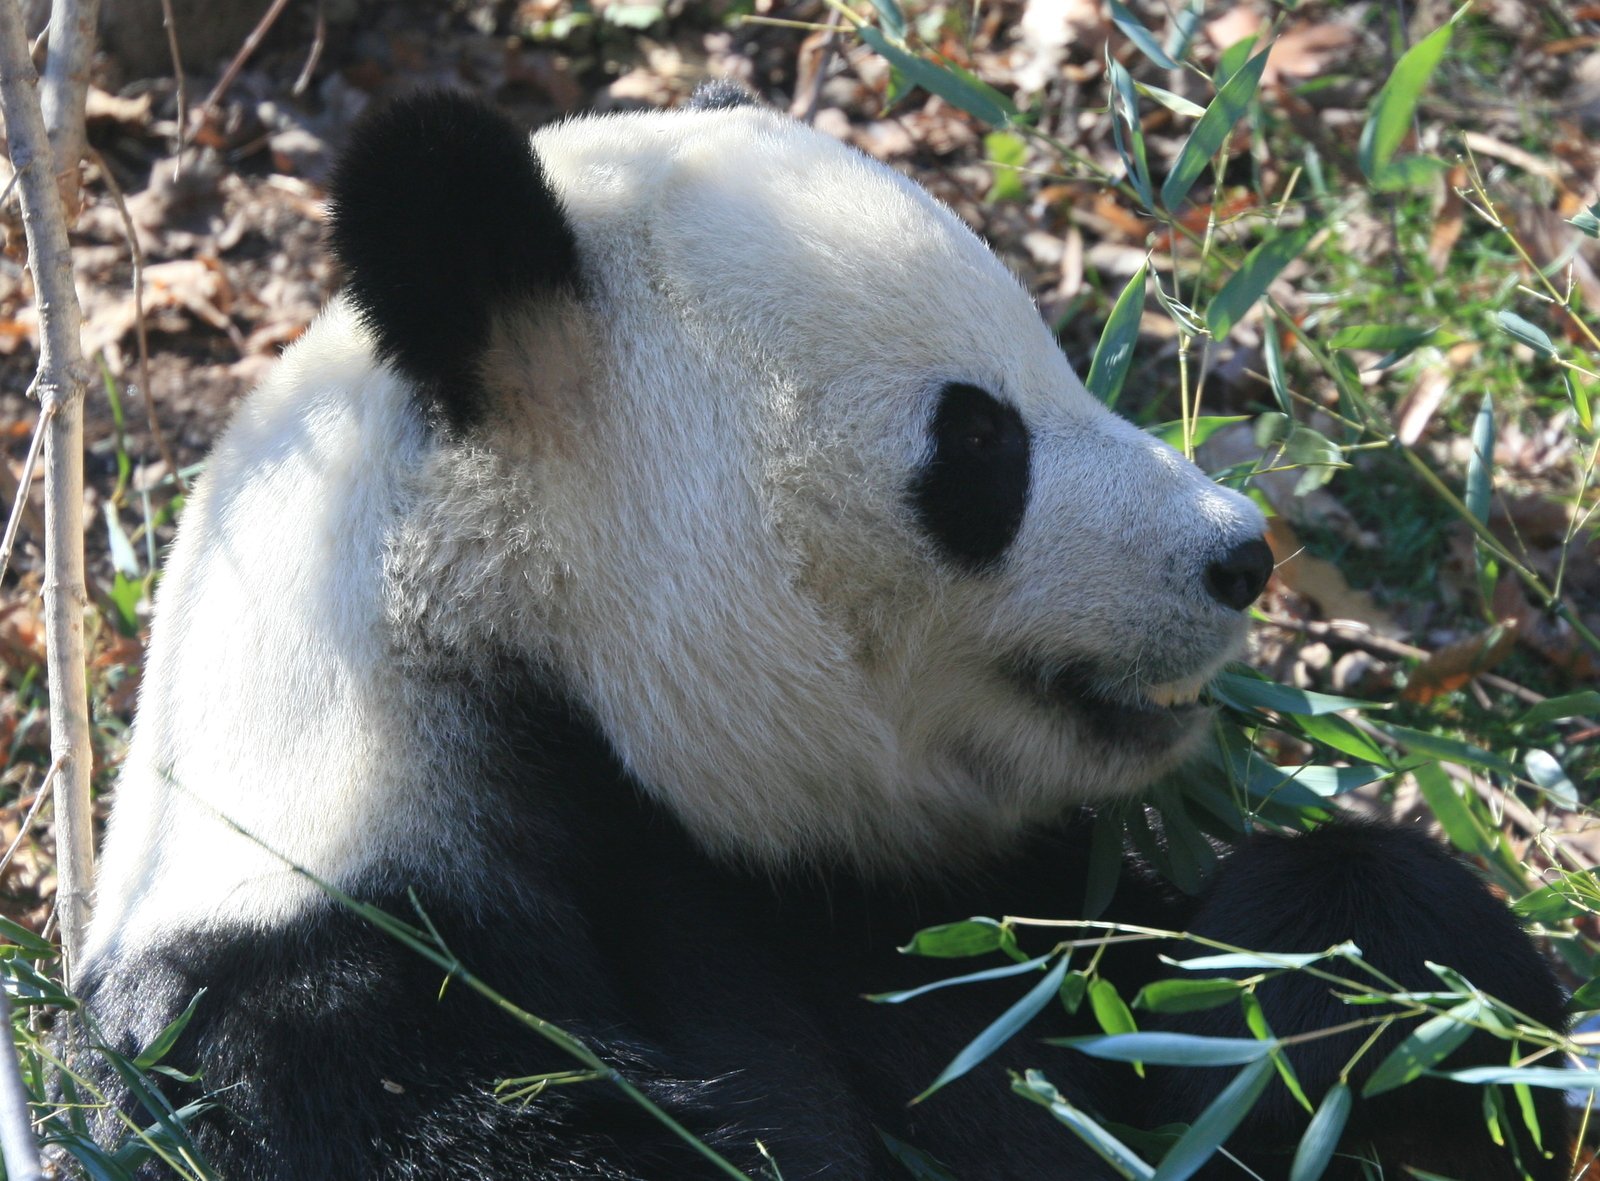 the panda is laying down on some leaves